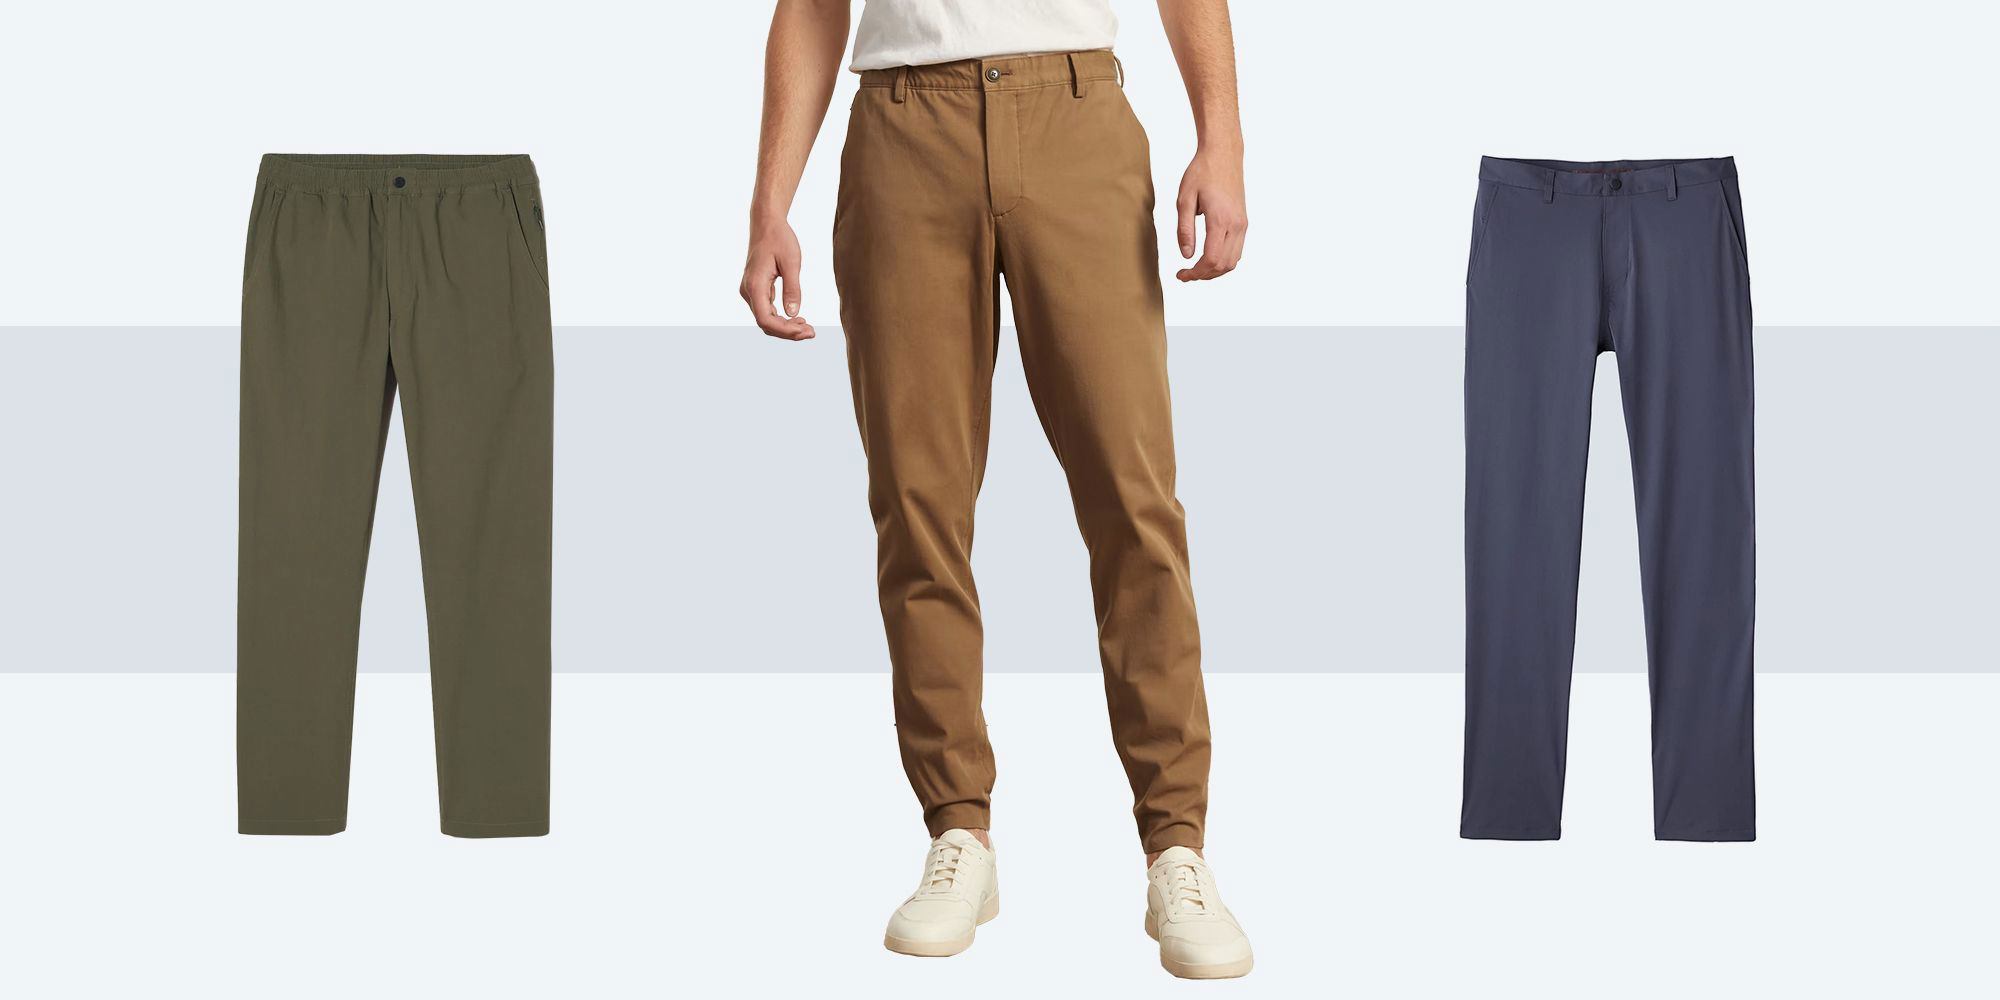 Upgrade His Travel Wardrobe With These Comfy and Sleek Pants